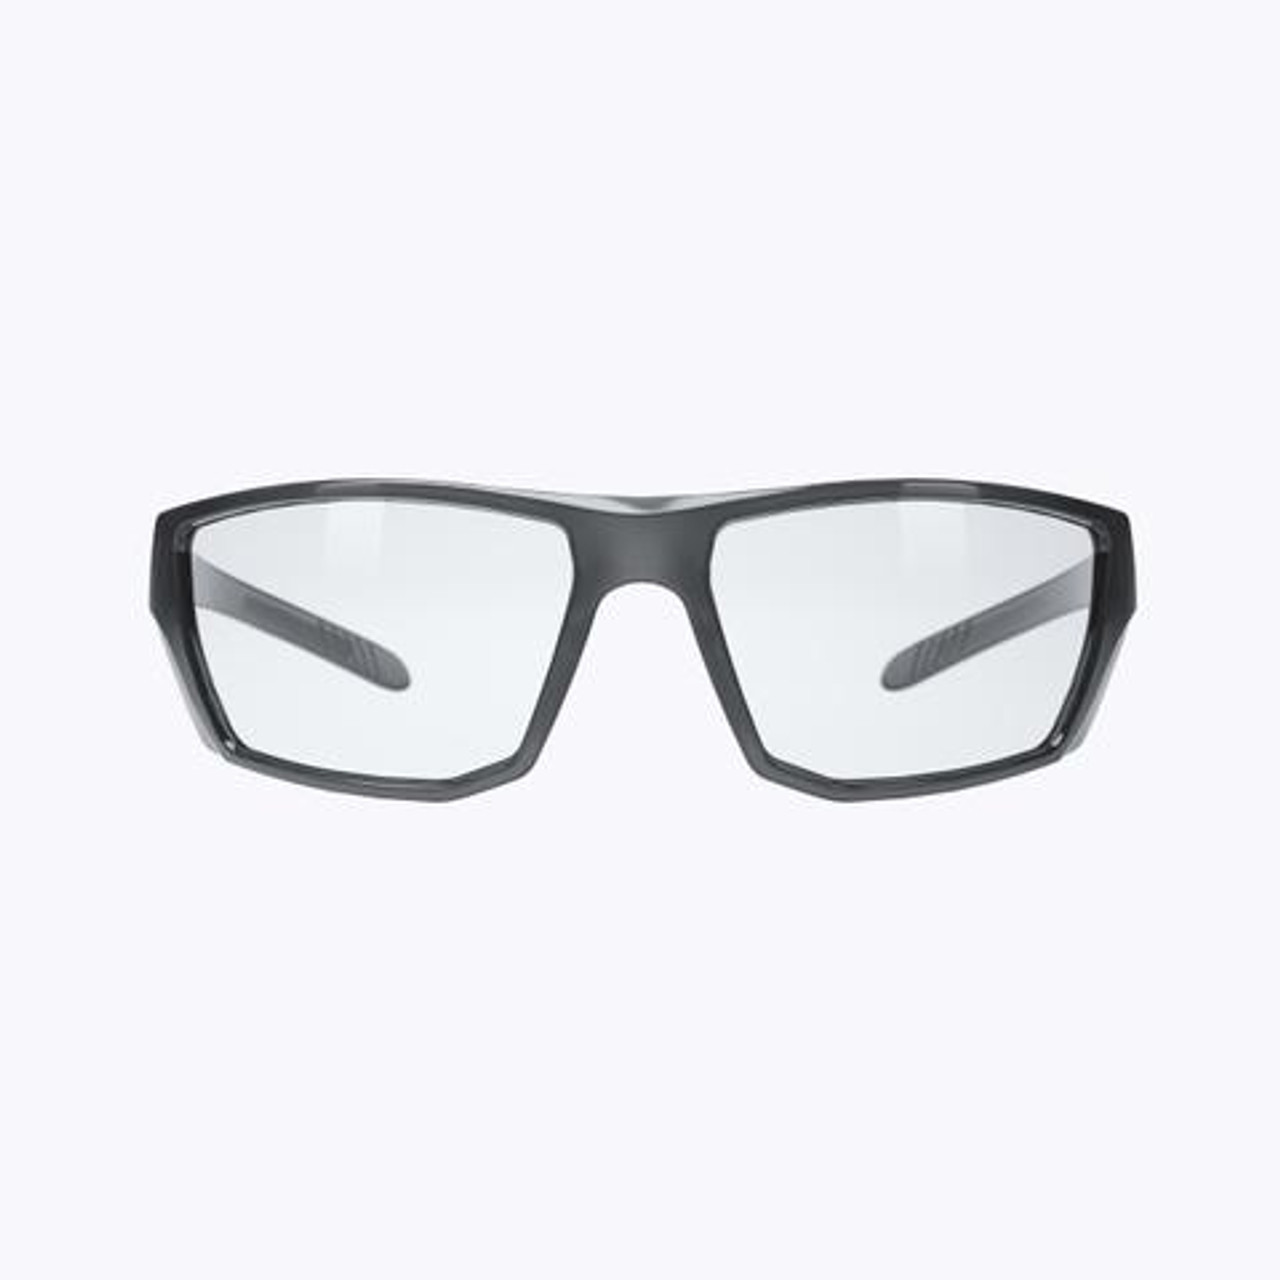 Buy online in Cabinet Makers HELLBERG Safety Glasses for Woodworkers that are comfortable and durable.